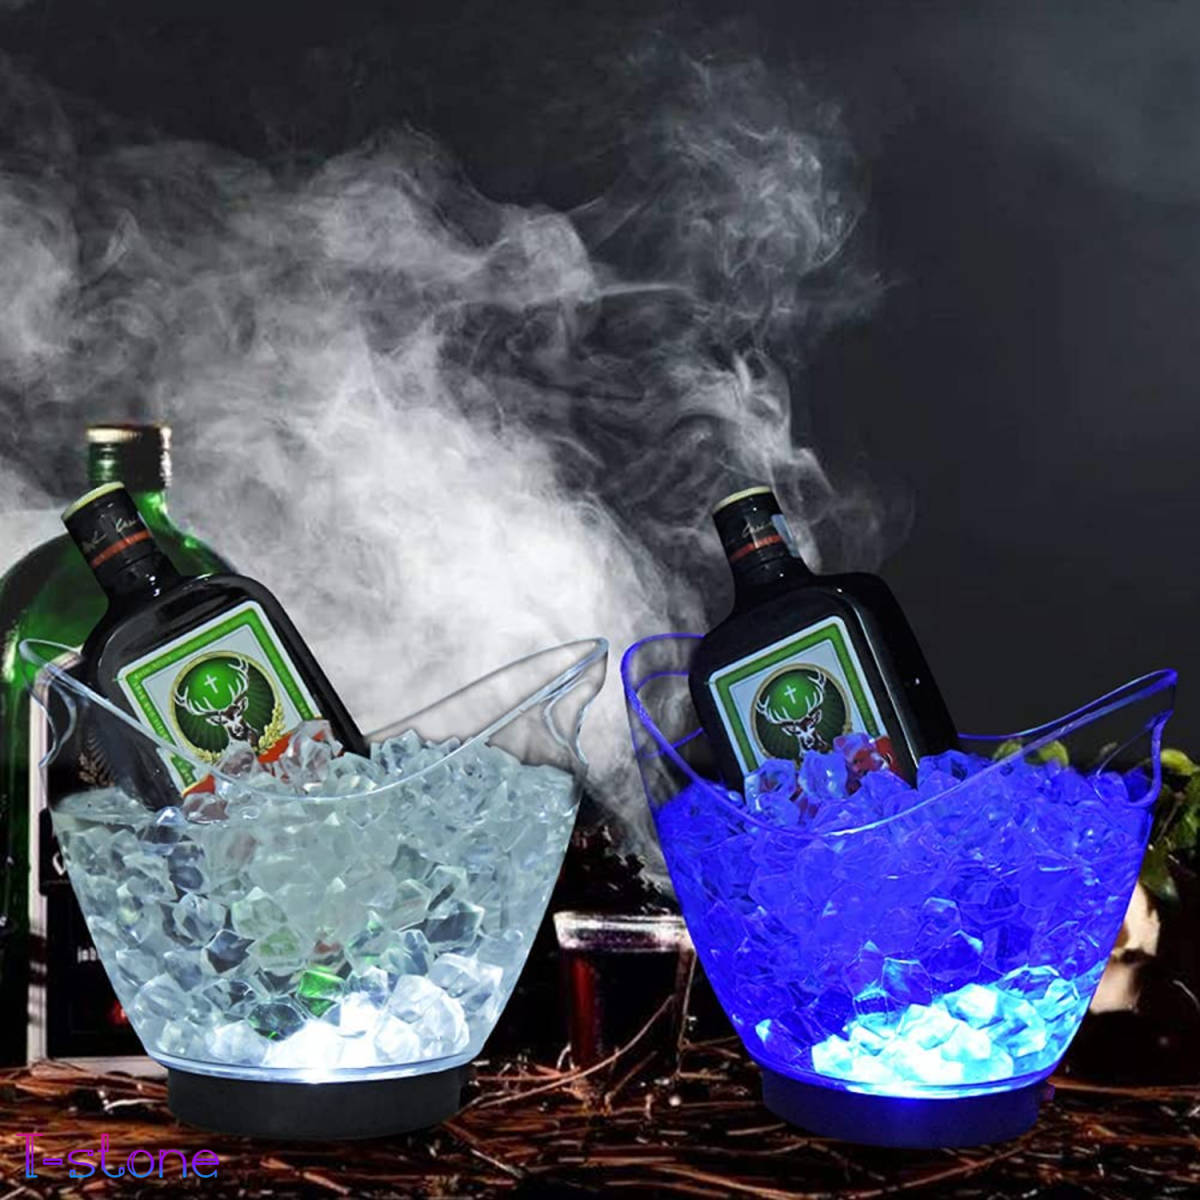  cocktail cooler,air conditioner 2L high capacity LED ice basket Home bar stylish presence eminent! light weight light. diffused reflection feeling of luxury overflow neon light atmosphere making 